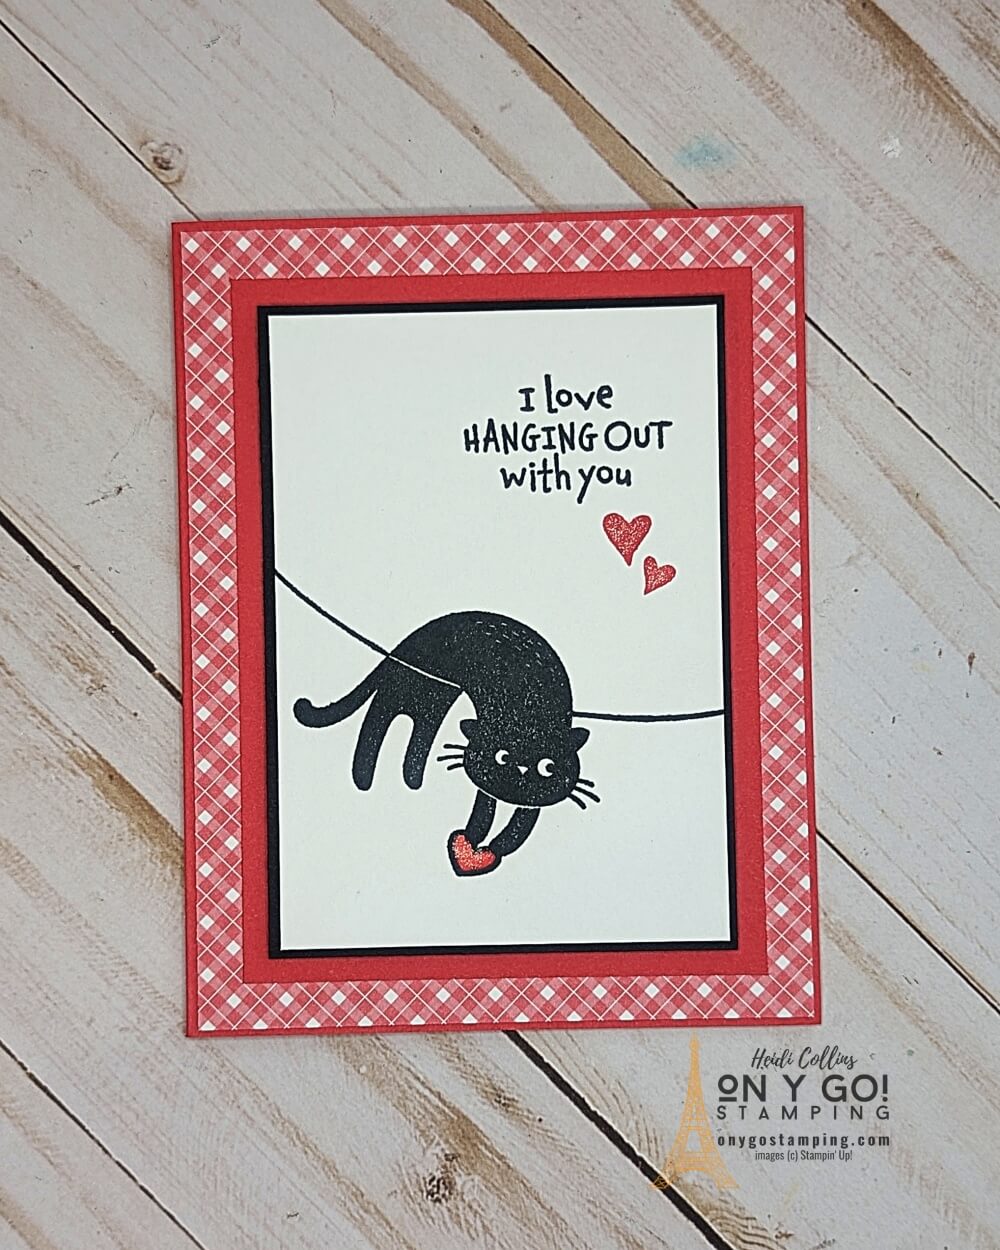 This Valentine's Day, make your sweetheart melt with handmade cards using the Love Cats stamp set and Country Gingham patterned paper from Stampin' Up! Let the love of cats shine through with this set of adorable kitties, perfect for adding a unique and special touch to your cards. Plus, with the Country Gingham patterned paper you can make cards that stand out and express your love. So make your Valentine's Day extra special with a handmade card that shows your sweetheart how much you care.